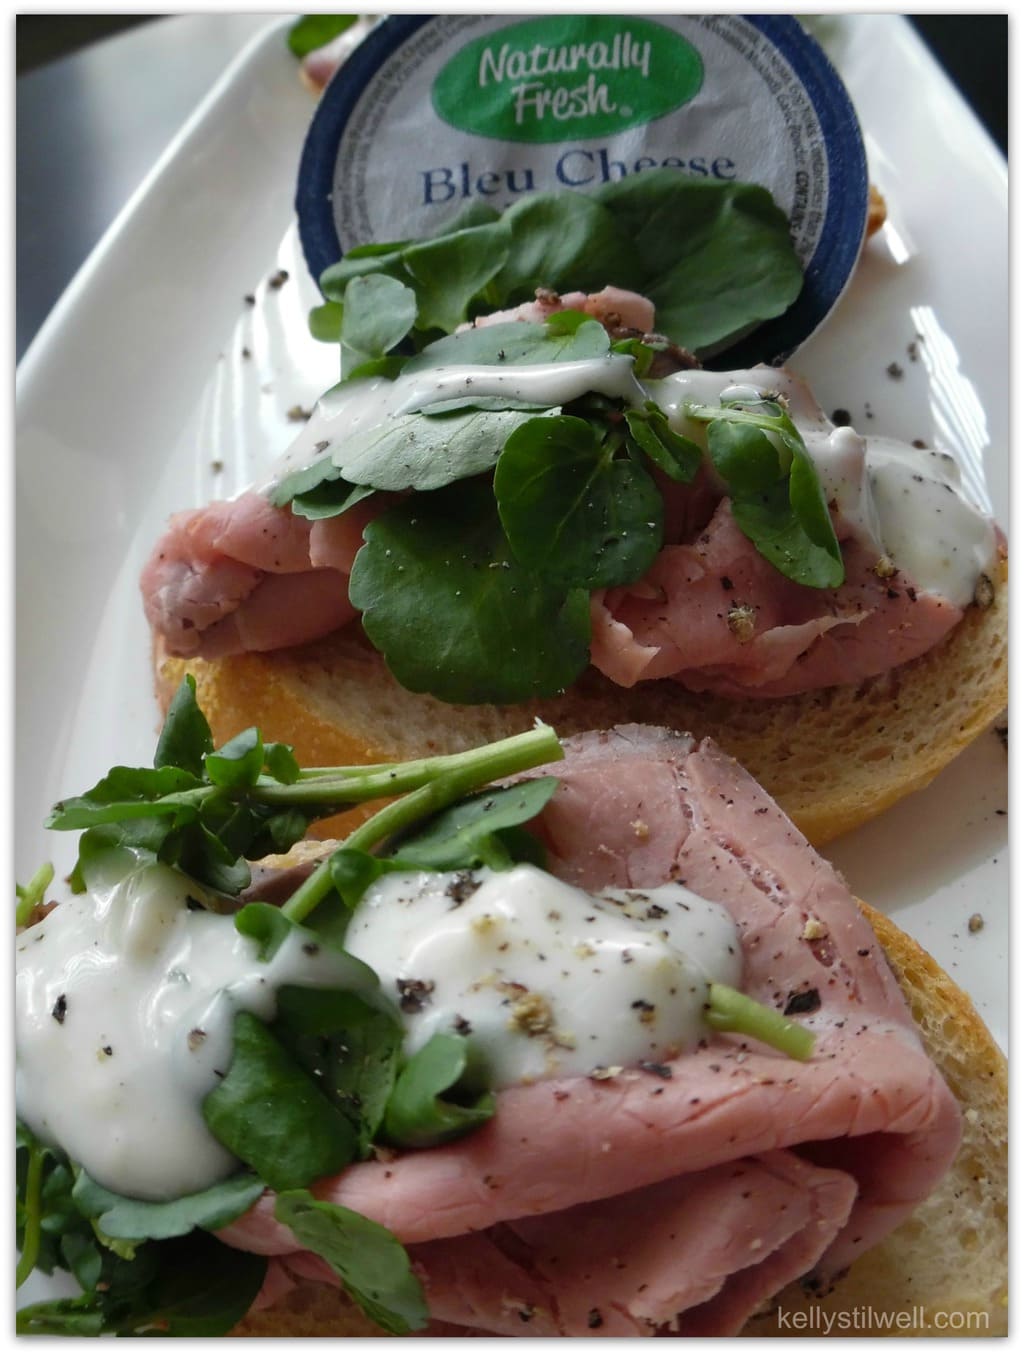 Roast beef on a slice of baguette with watercress and bleu cheese dressing.